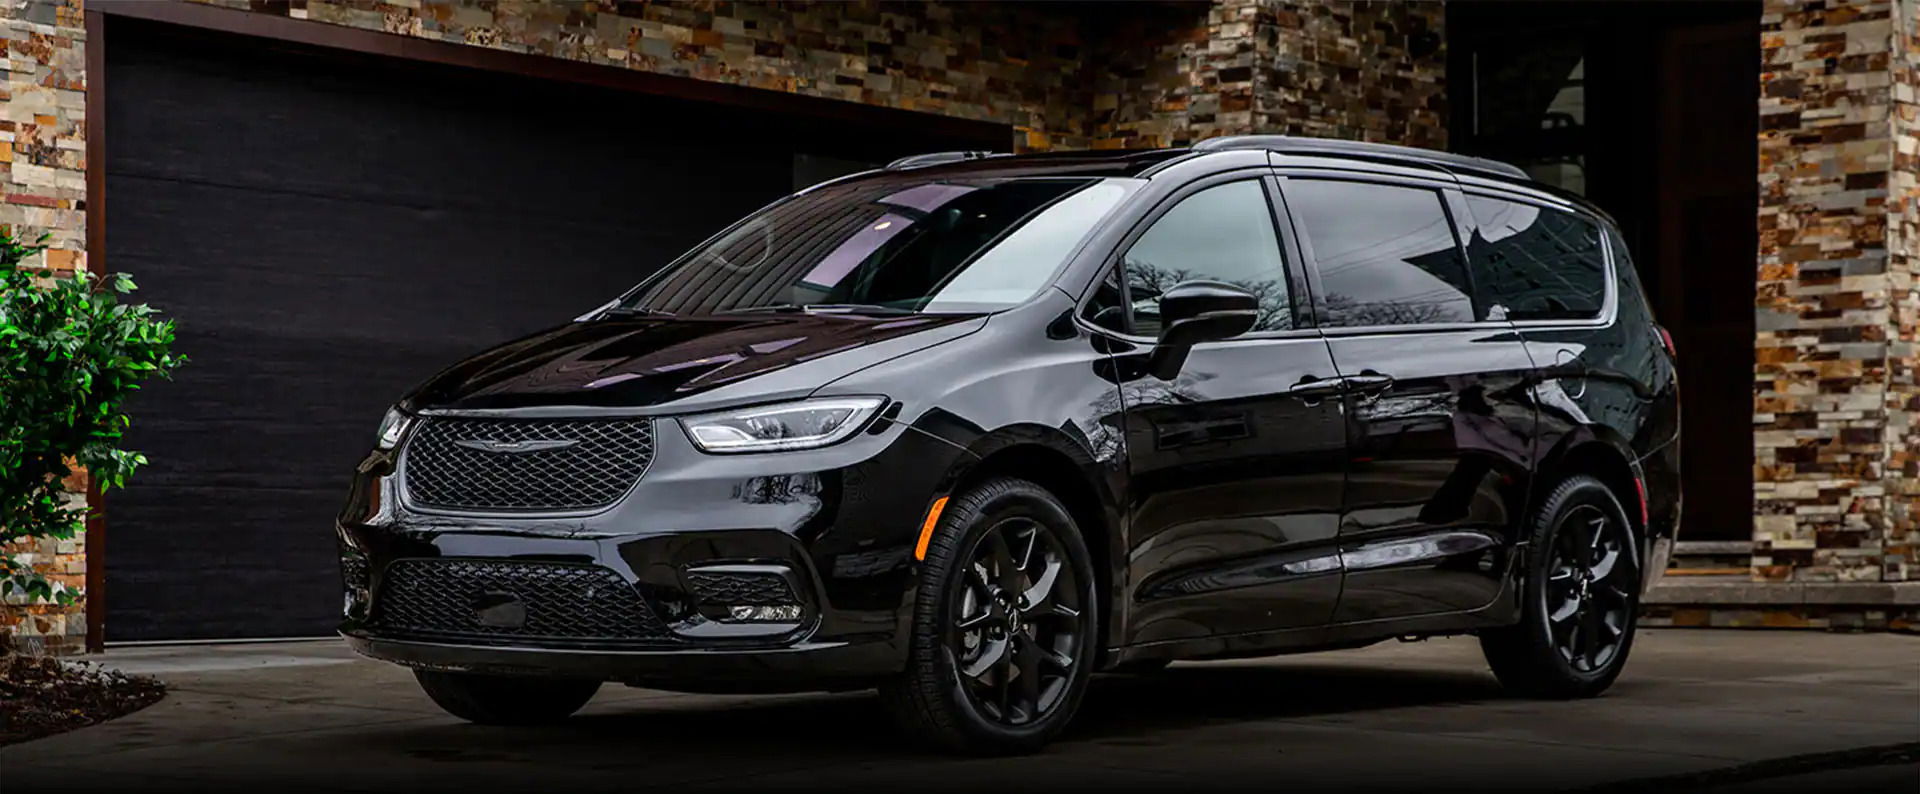 Reliable family cars: Chrysler Pacifica.